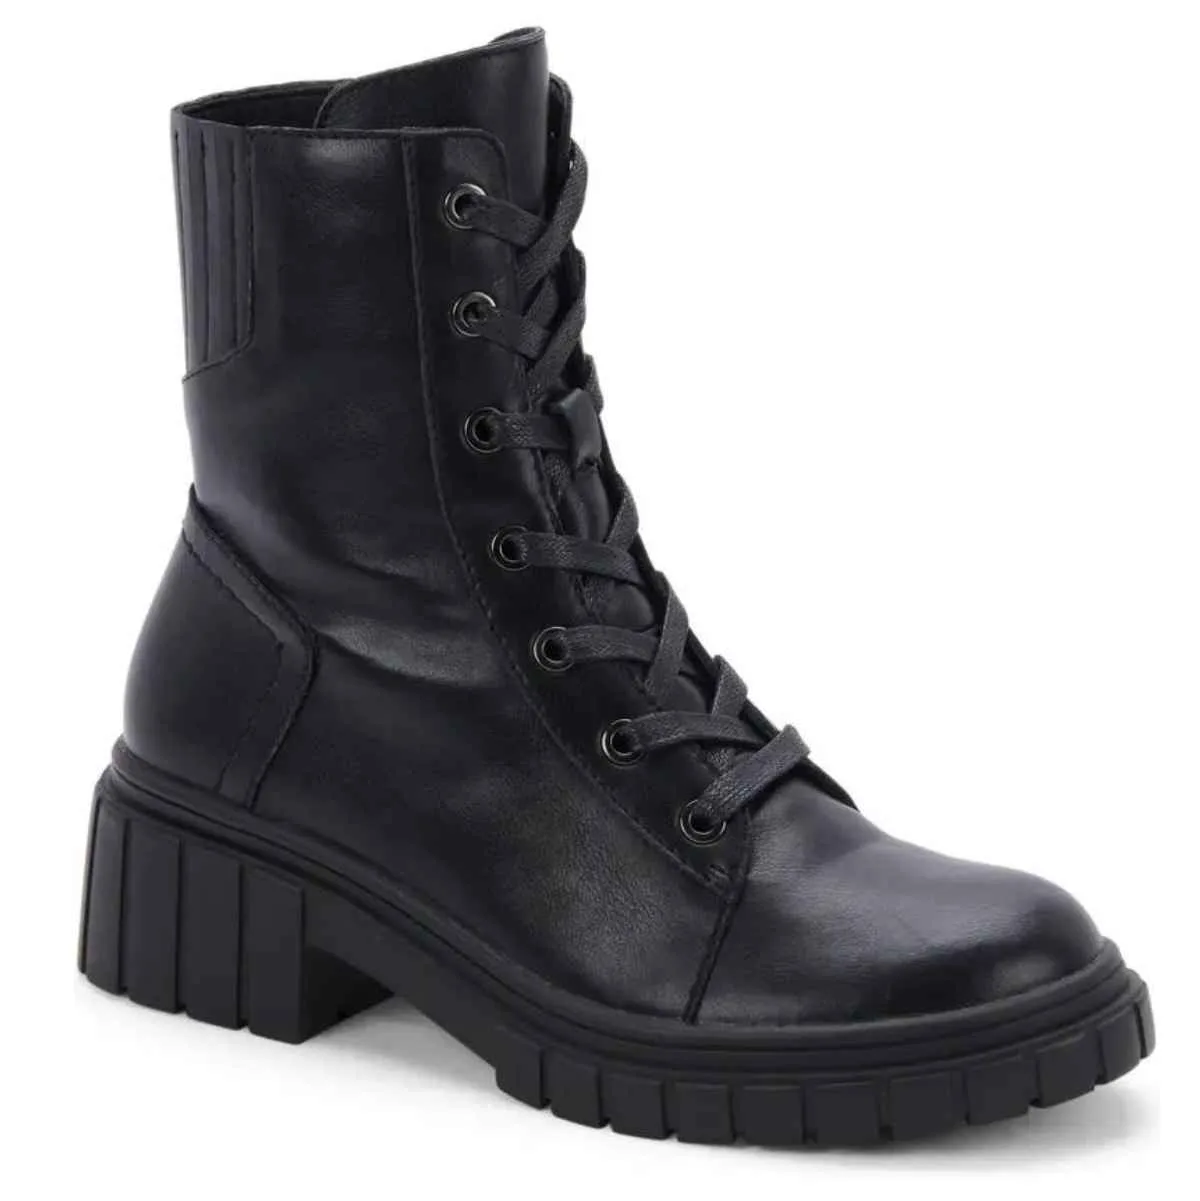 Women's black waterproof combat boots with chunk heel on a white background.